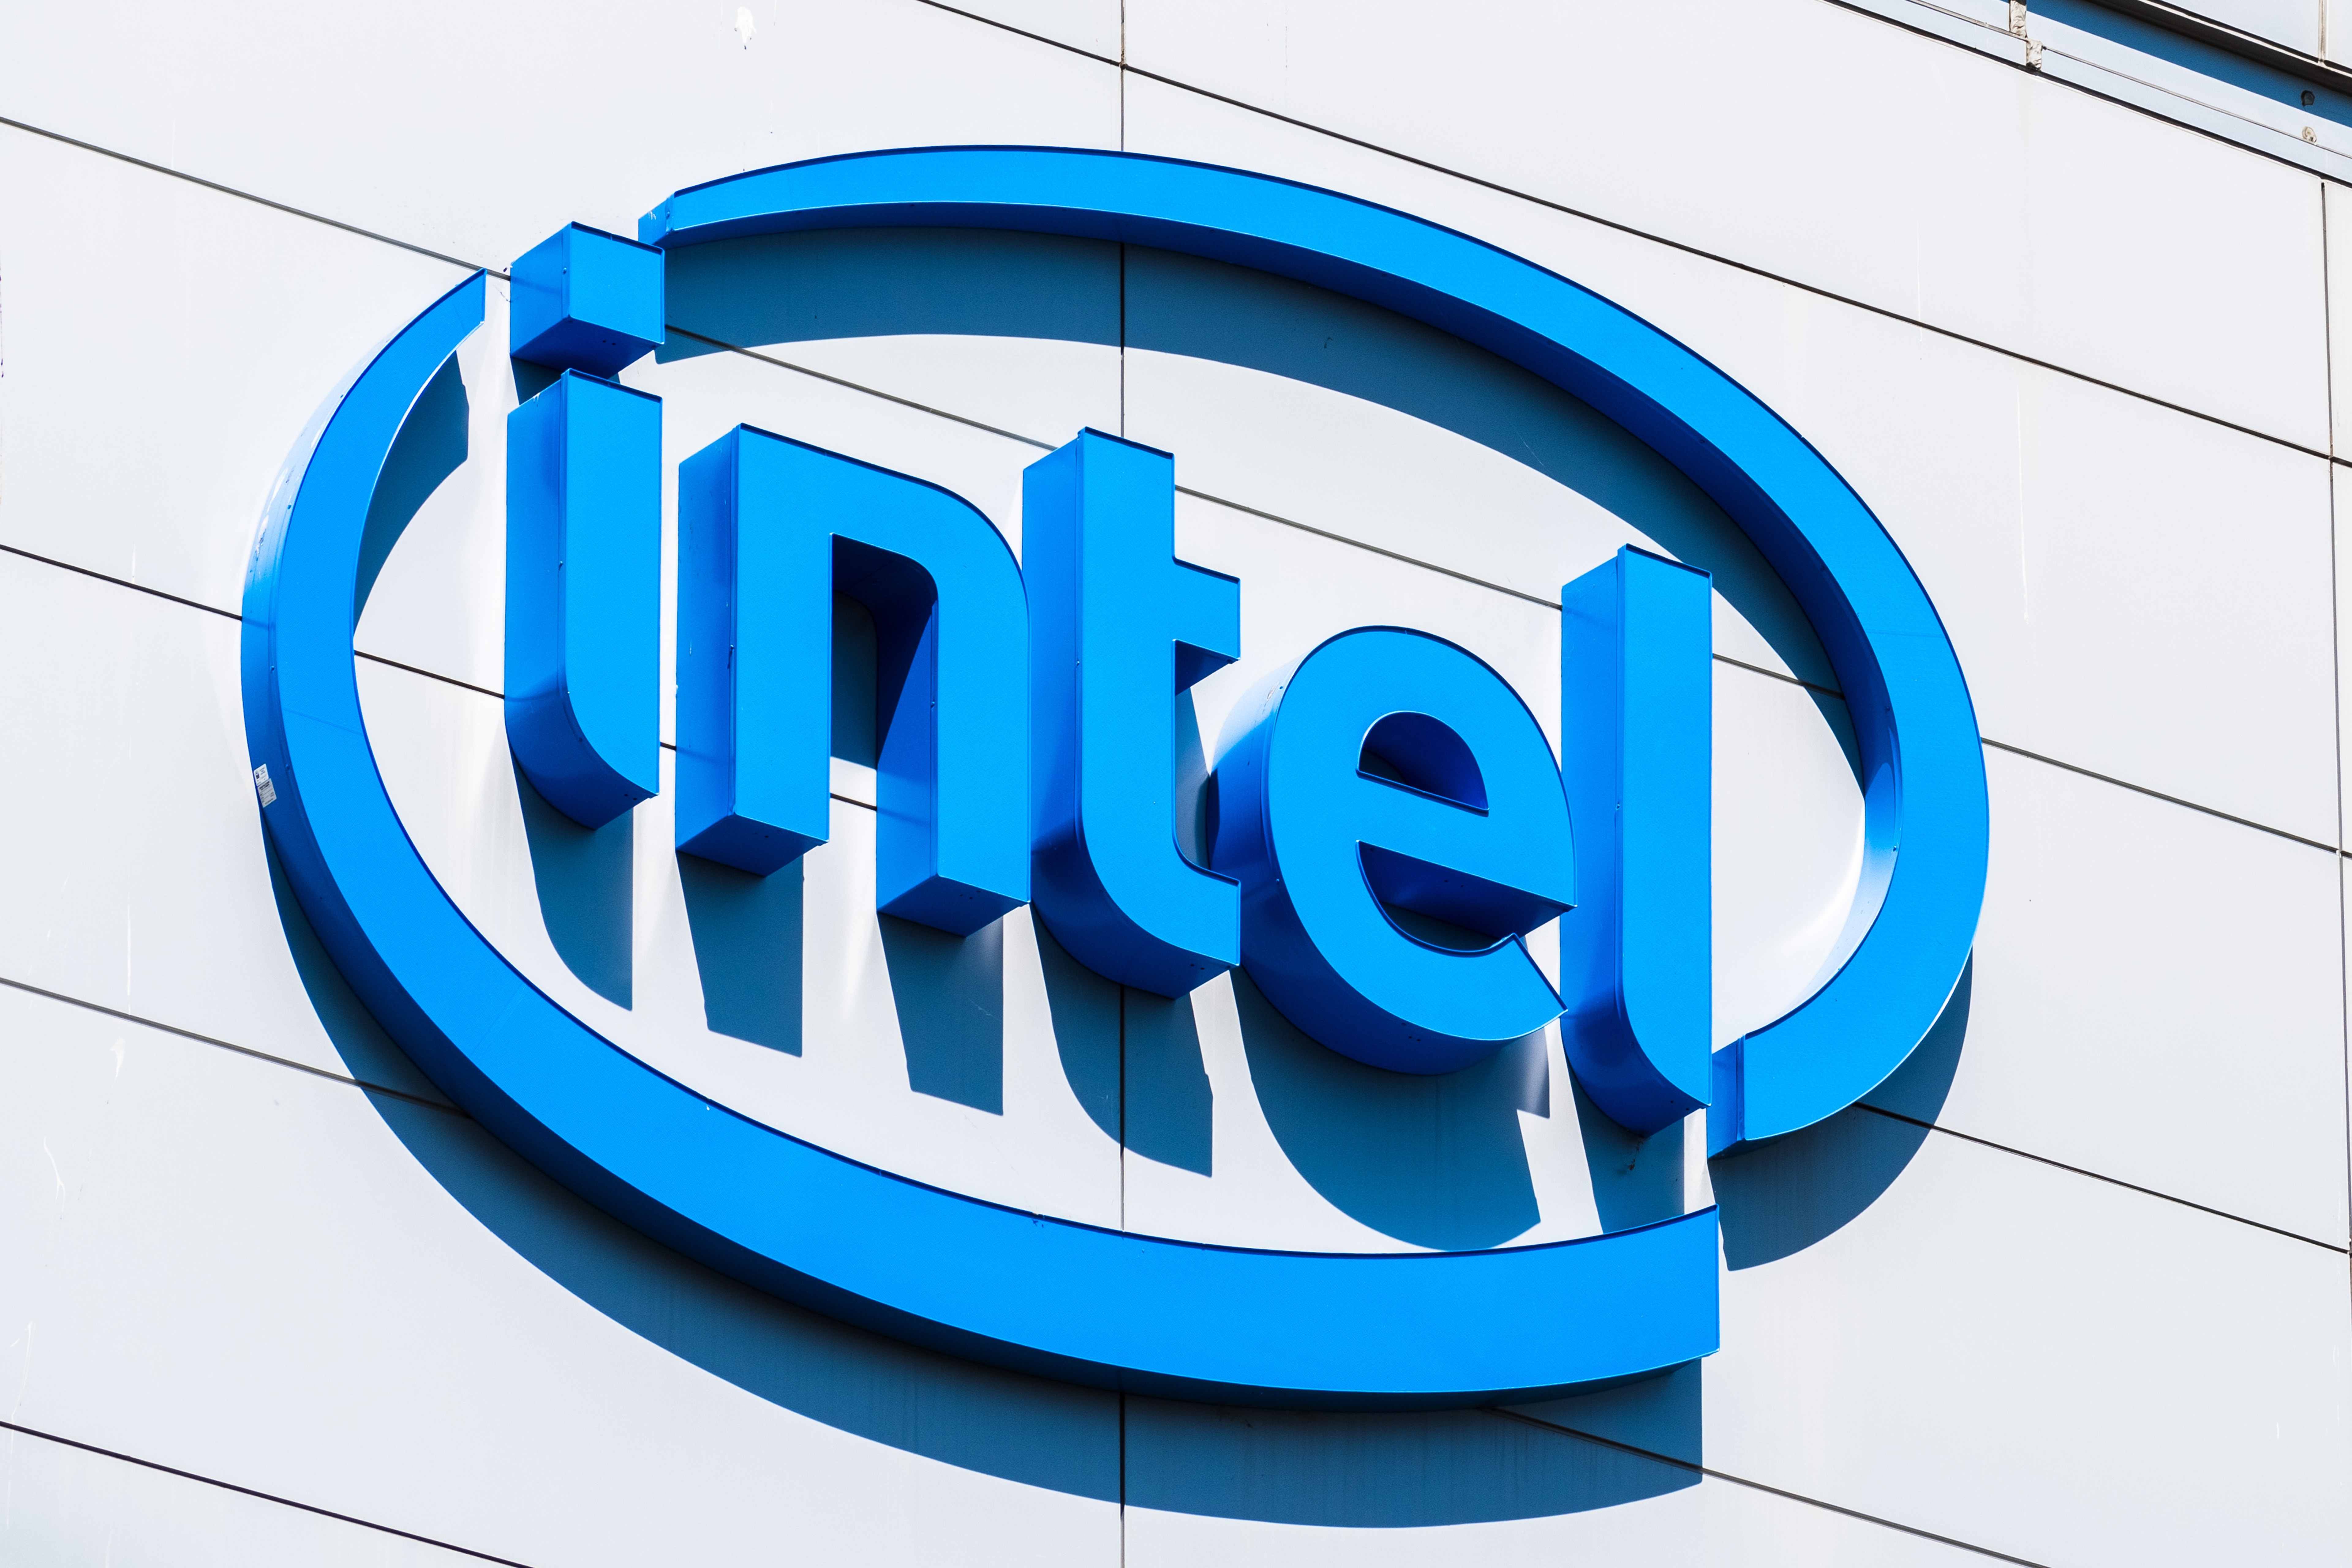 Intel Eyes Massive Job Cuts As Early As This Month To Sail Through PC Market Slump: Report